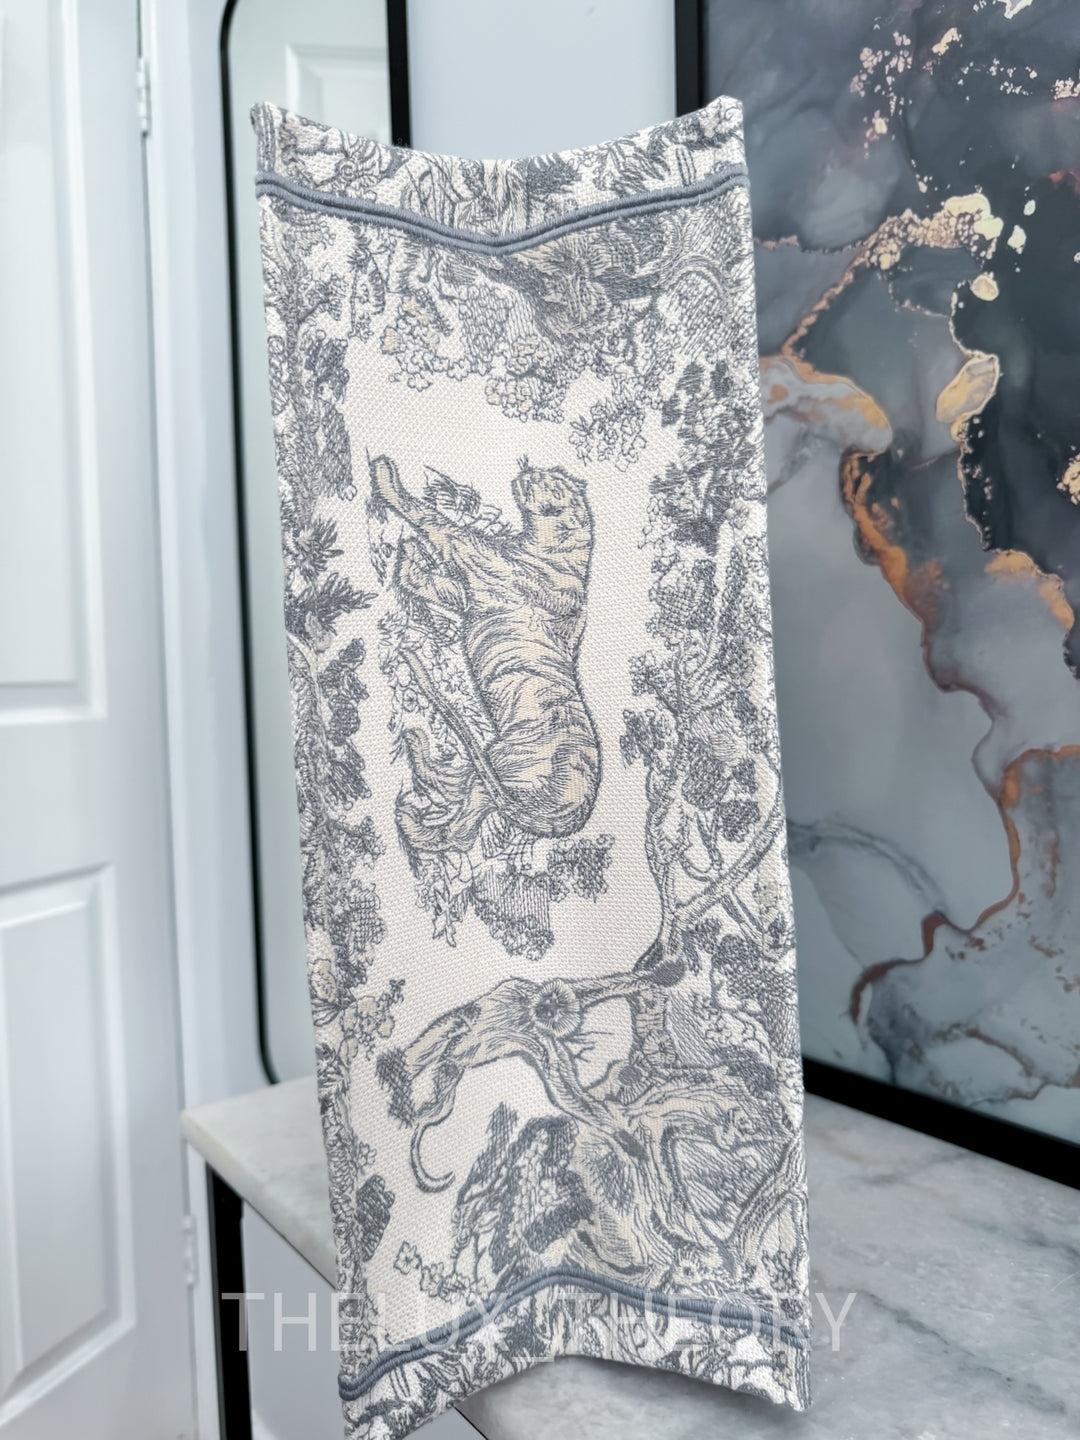 BOOK TOTE LARGE TOILE DE JOUY GREY 2021